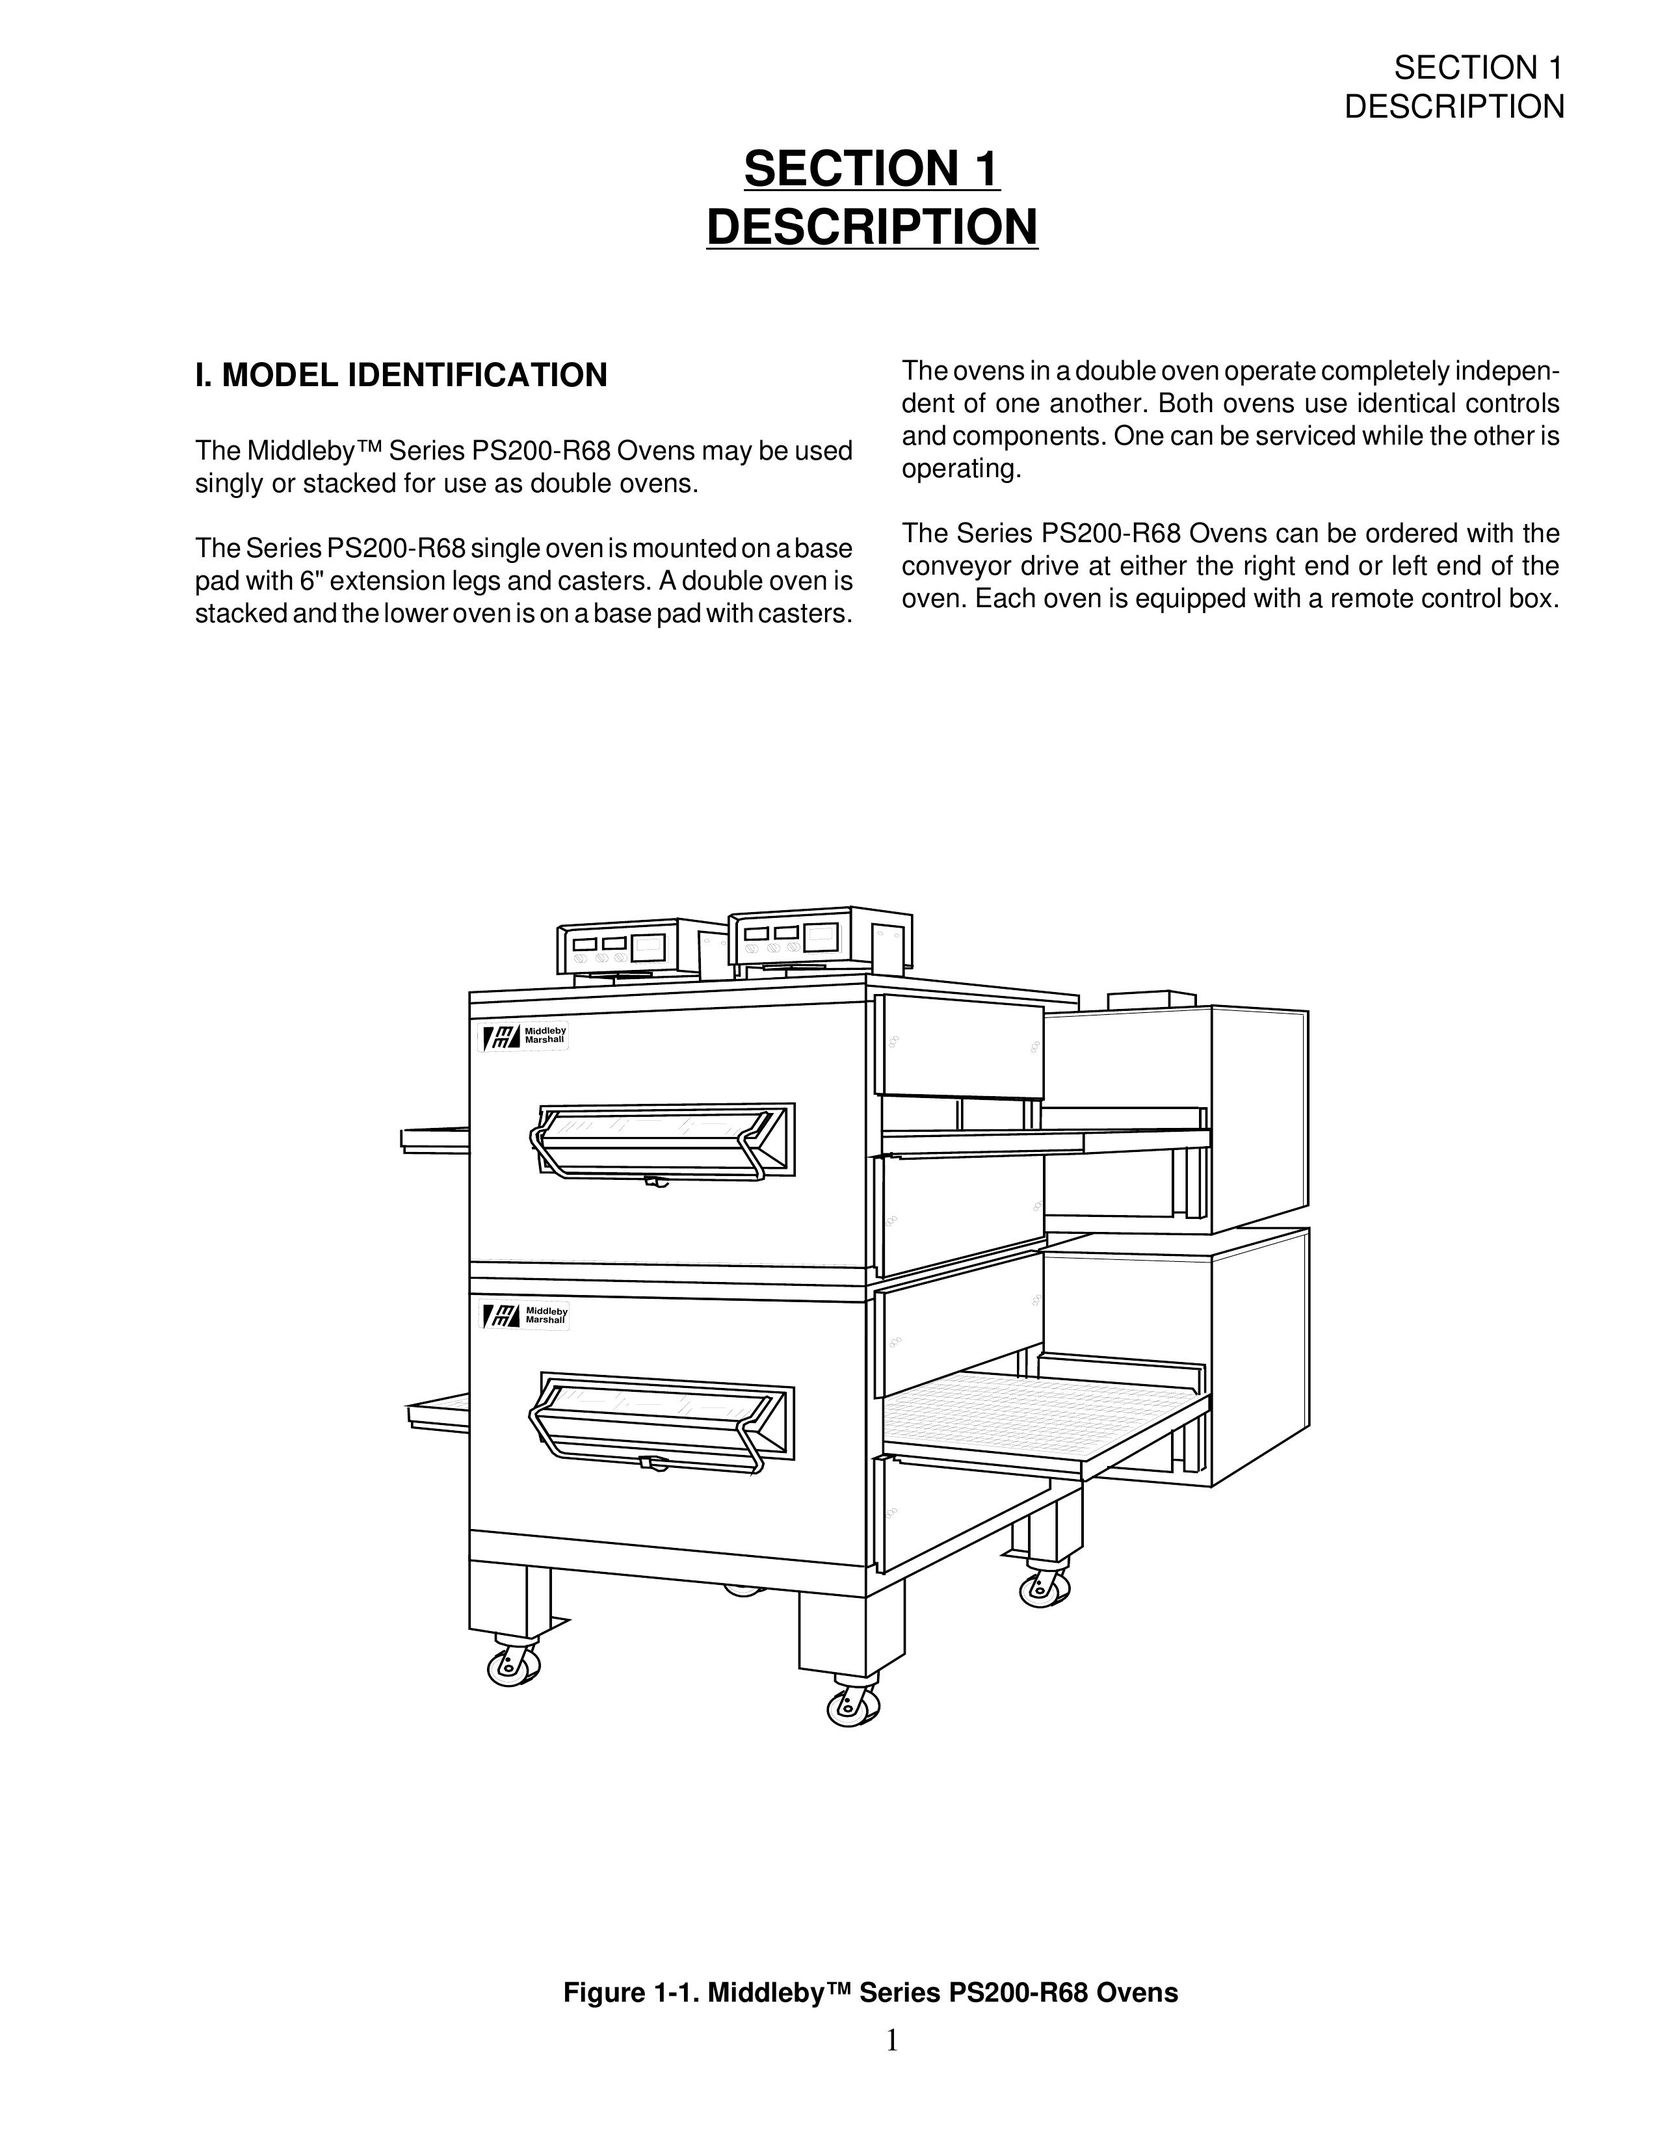 Middleby Cooking Systems Group PS200-R68 Double Oven User Manual